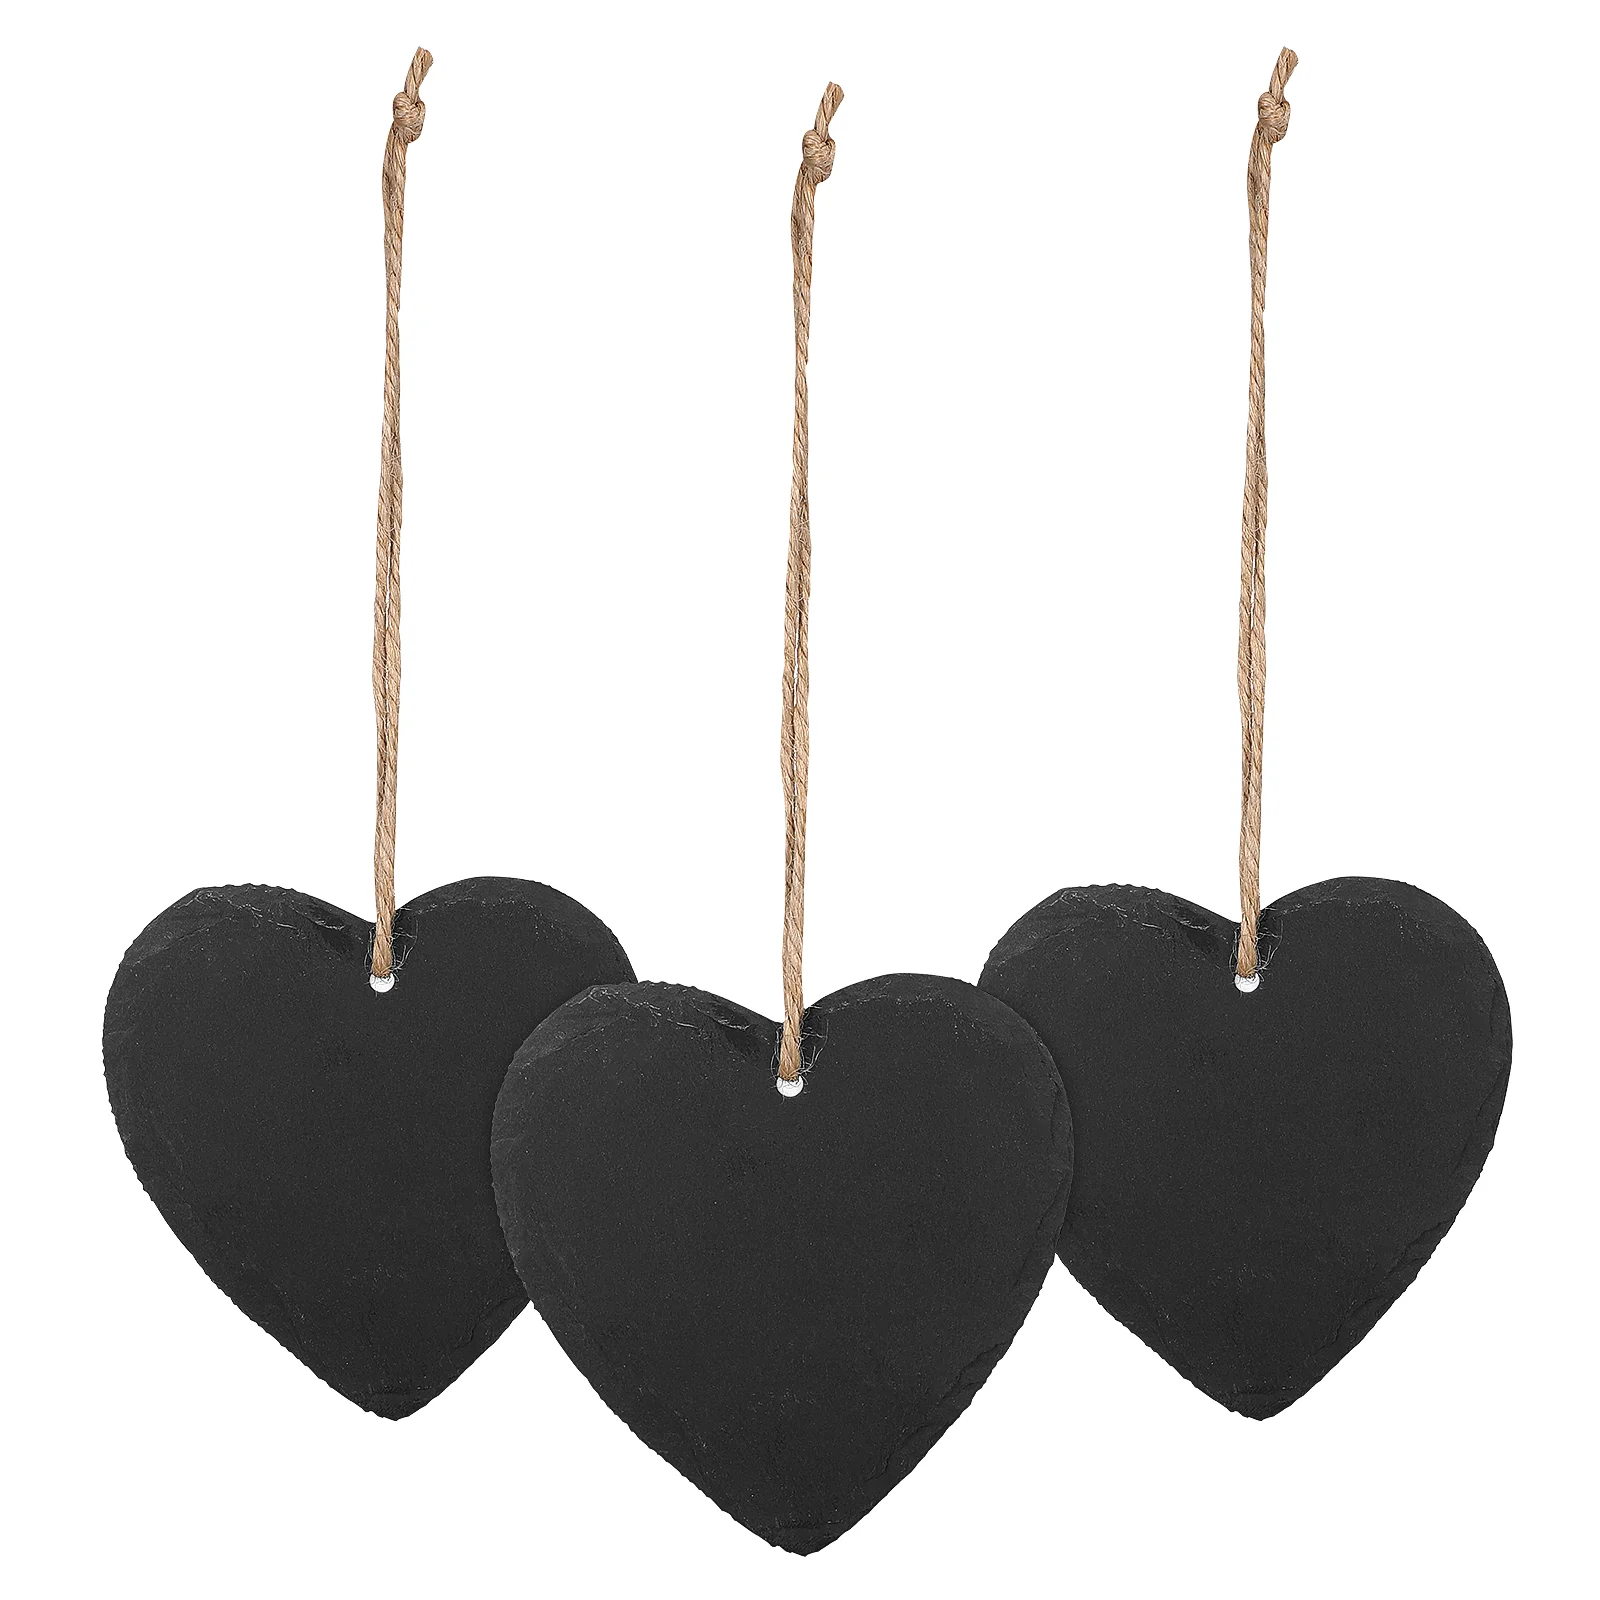 

3Pcs Slate Labels Heart Shaped Memo Board Slate Tags Food Sign Garden Plant Marker with Jute Rope for Labeling